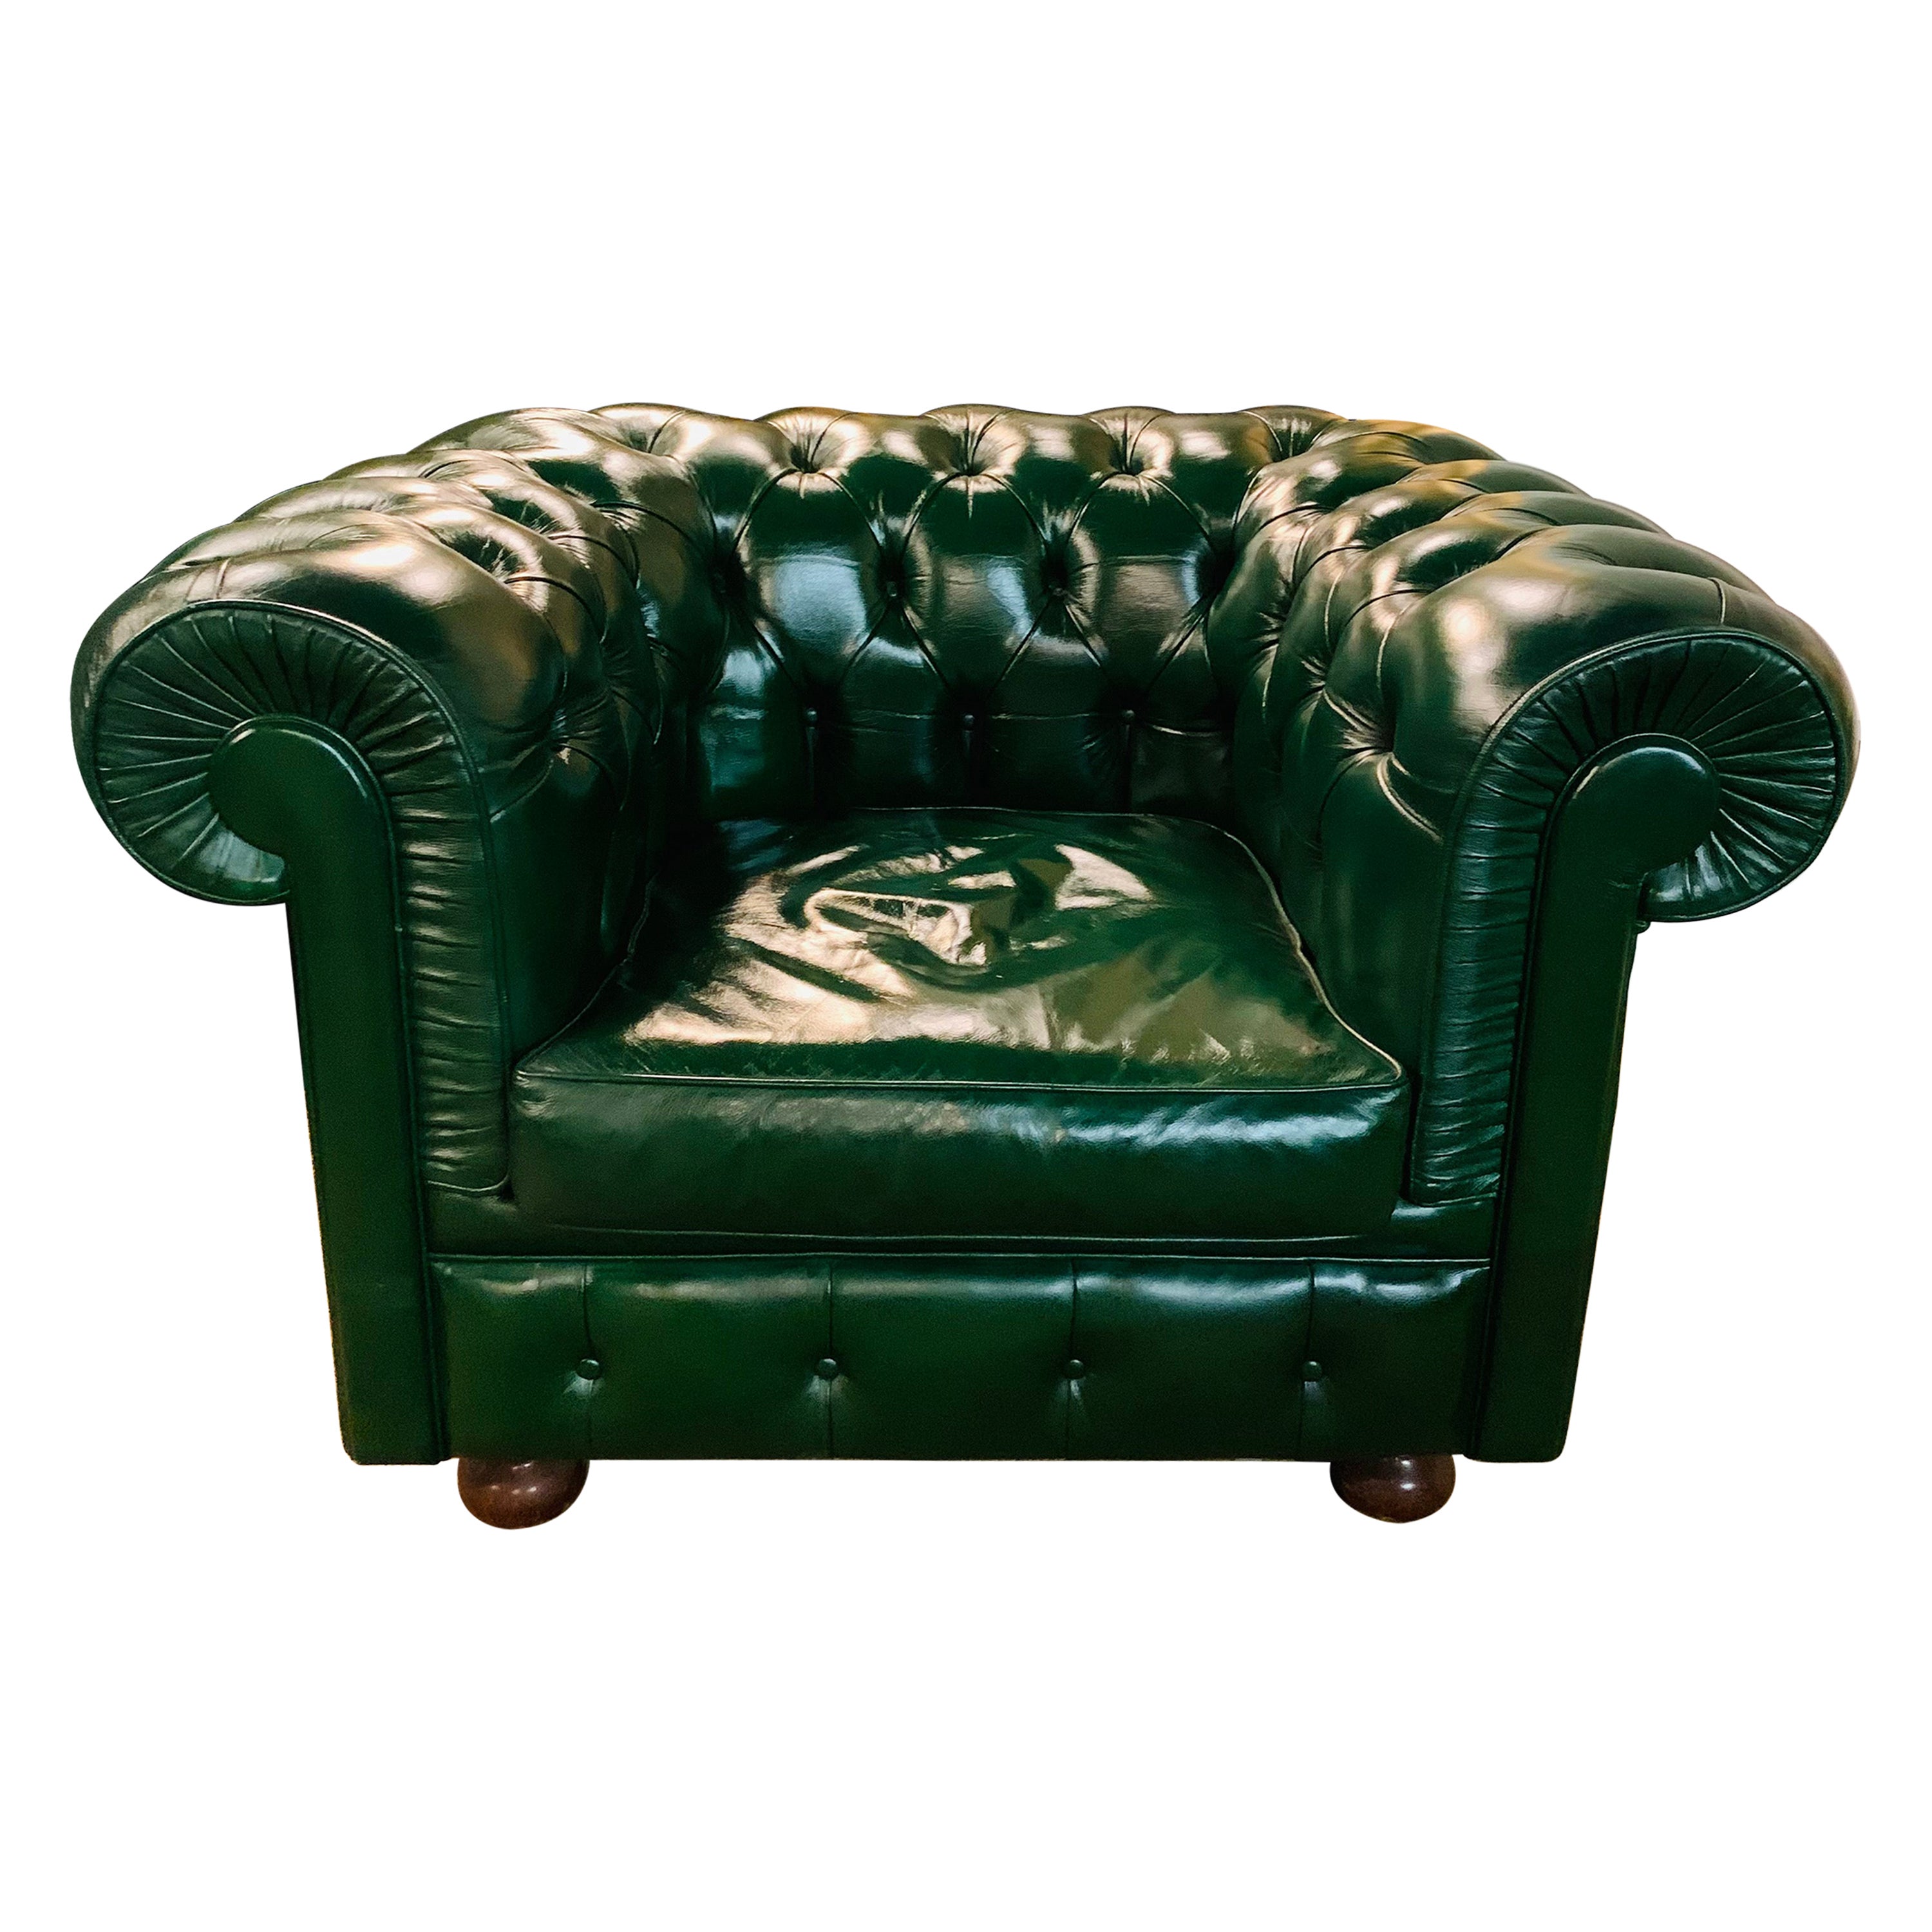 Green Leather Chesterfield Club Suite, Green Leather Club Chair